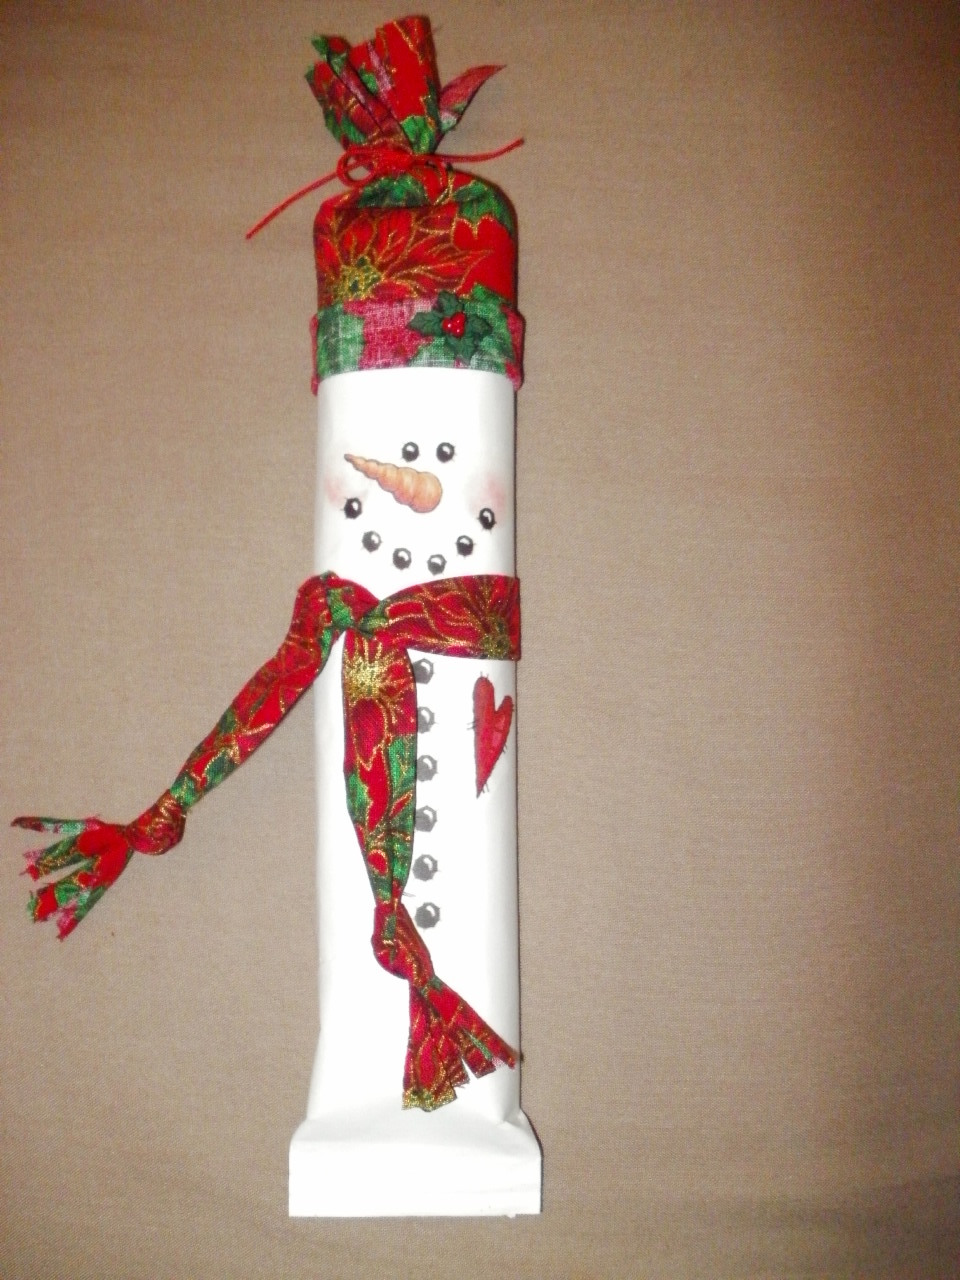 All Things Crafty: Snowman wrappers